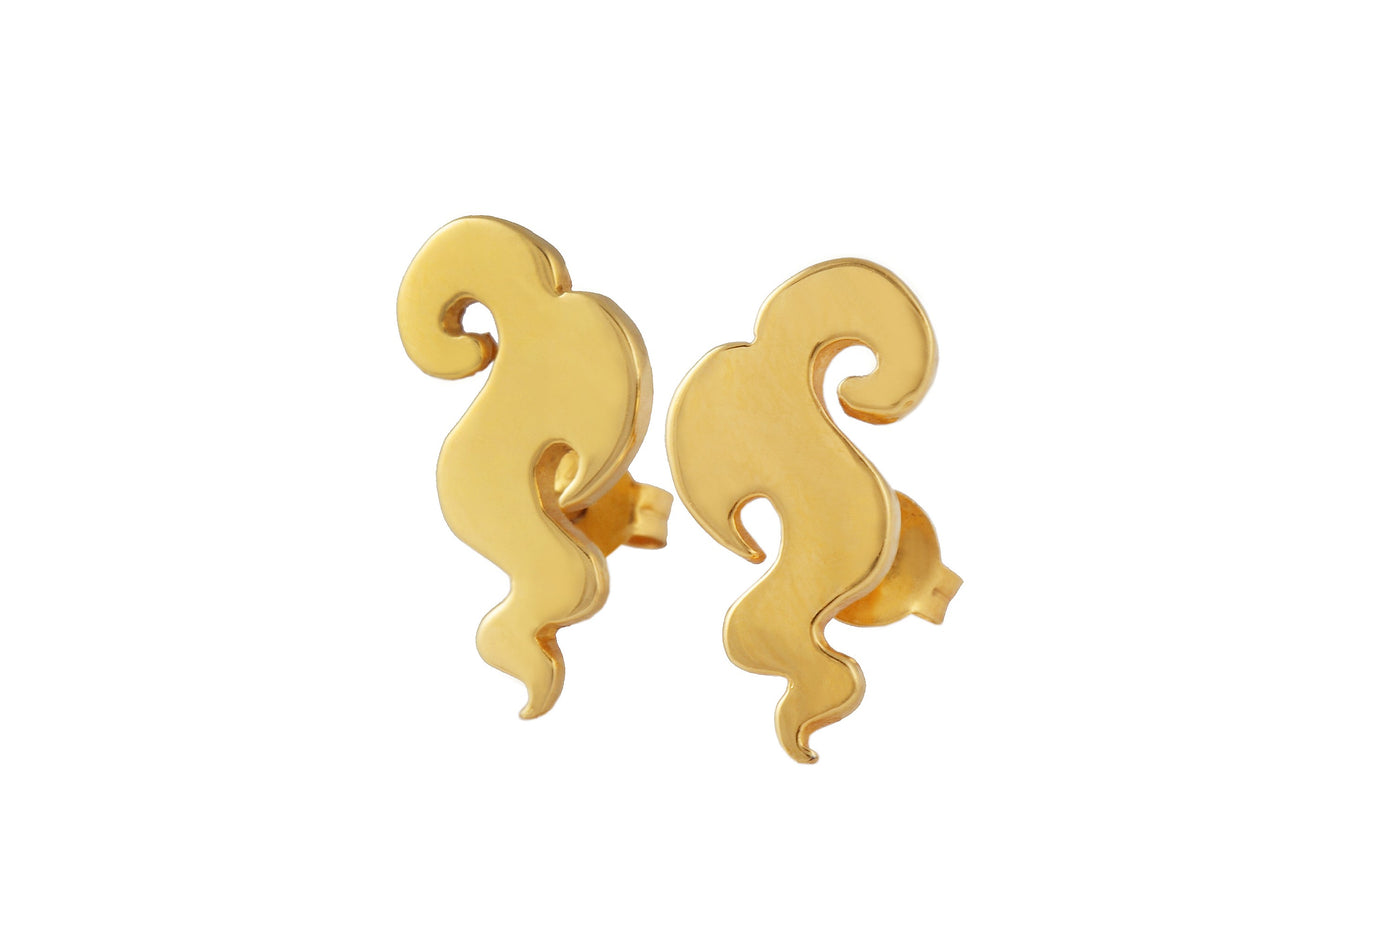 Cloud studs. Gold plated